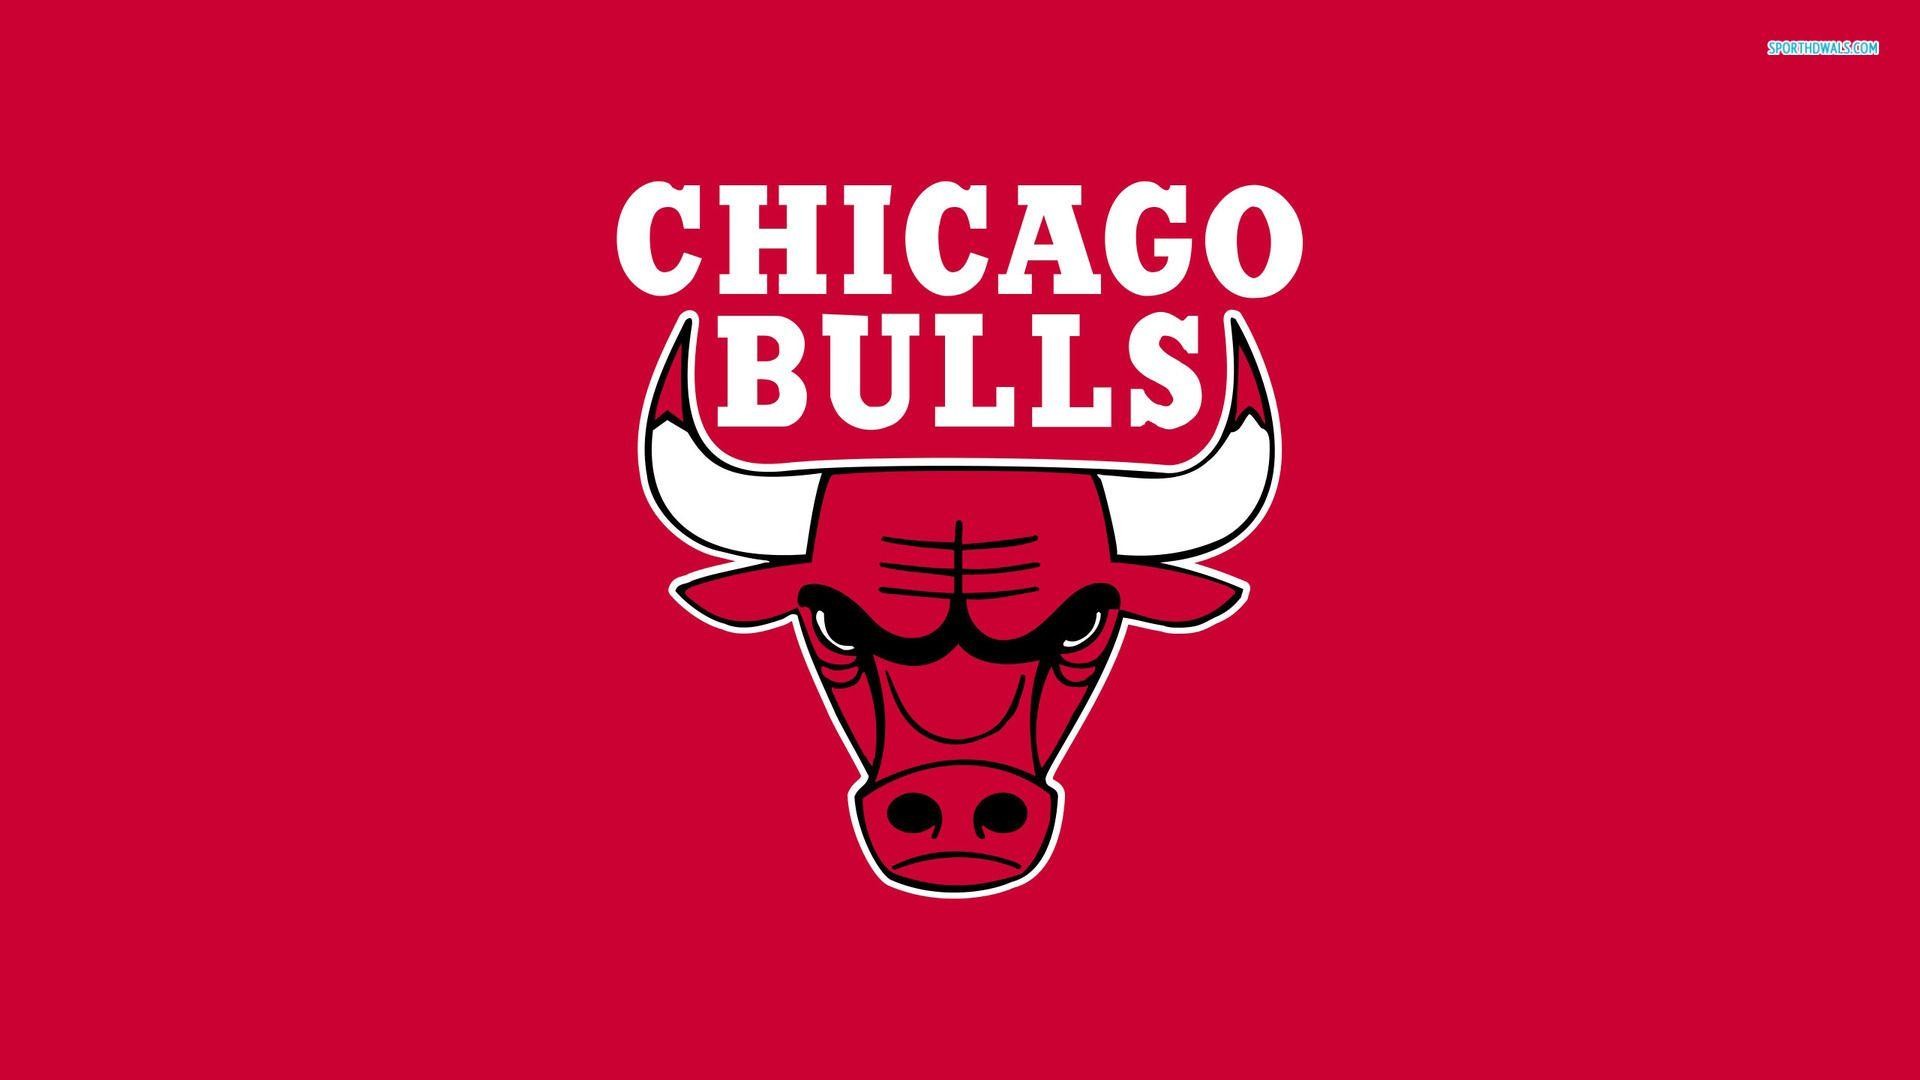 1920x1080 Chicago Bulls wallpapers | Chicago Bulls background - Page 17